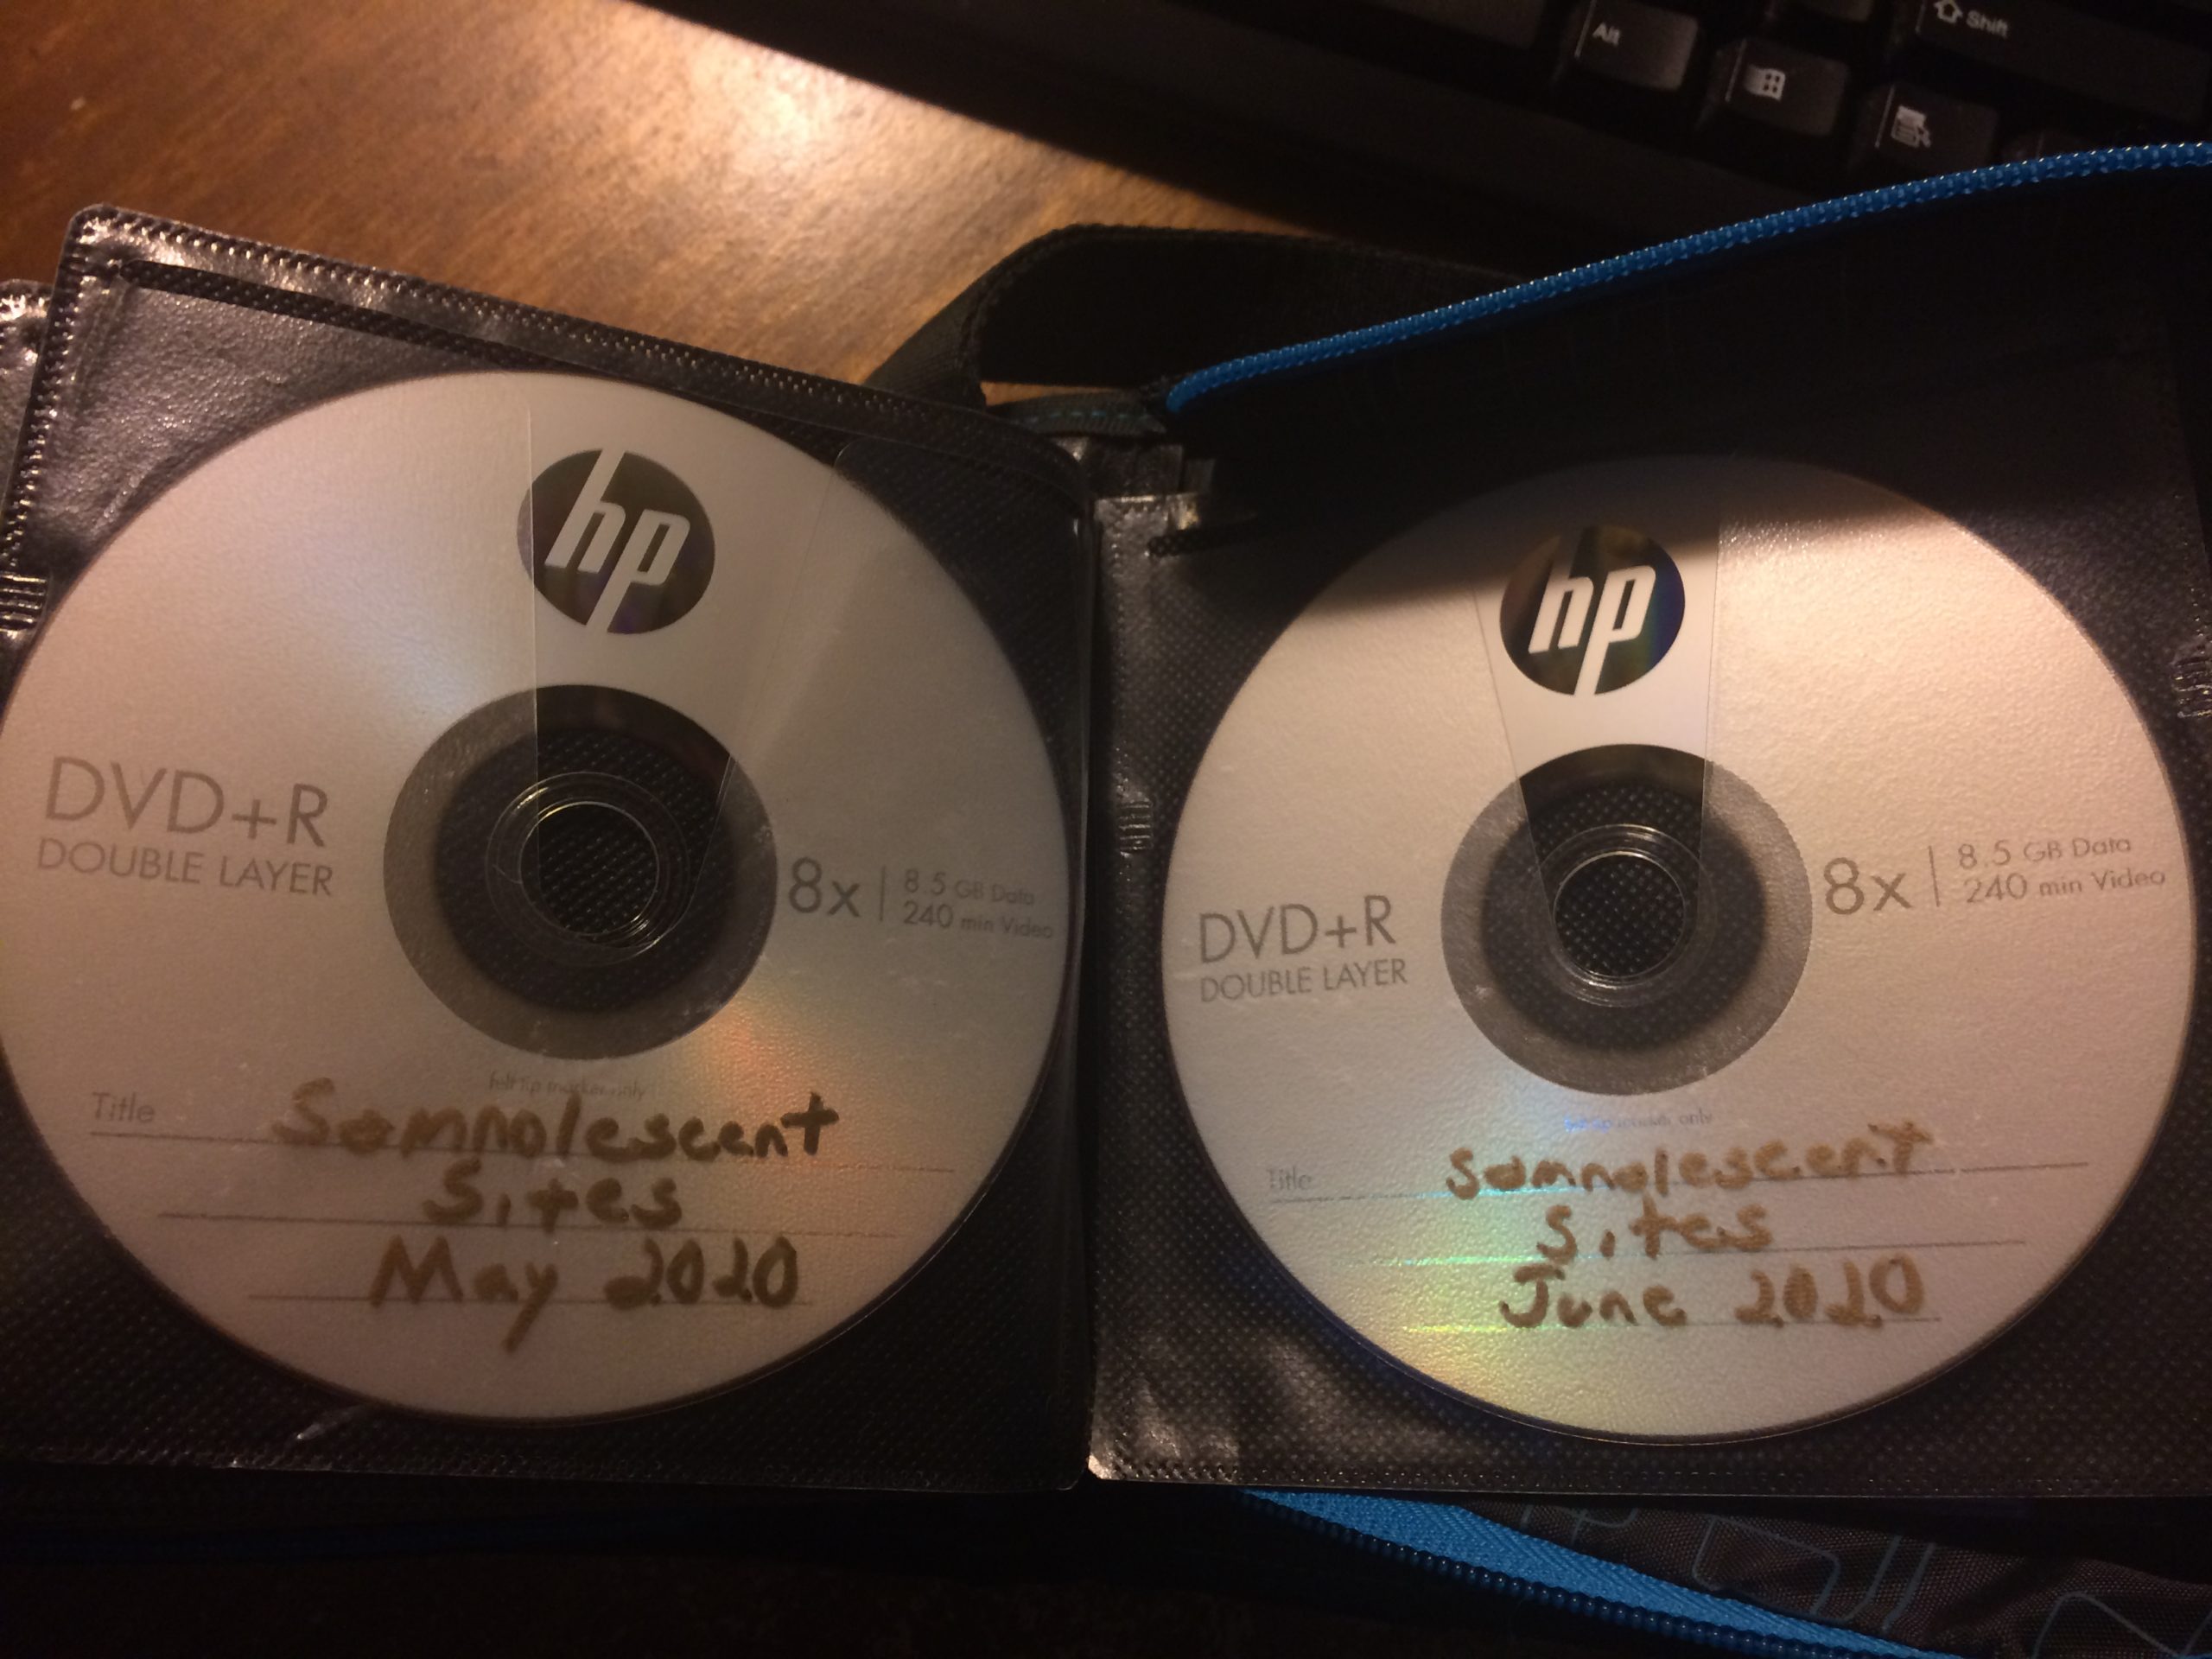 Some of Somnolescent's backup DVD-Rs